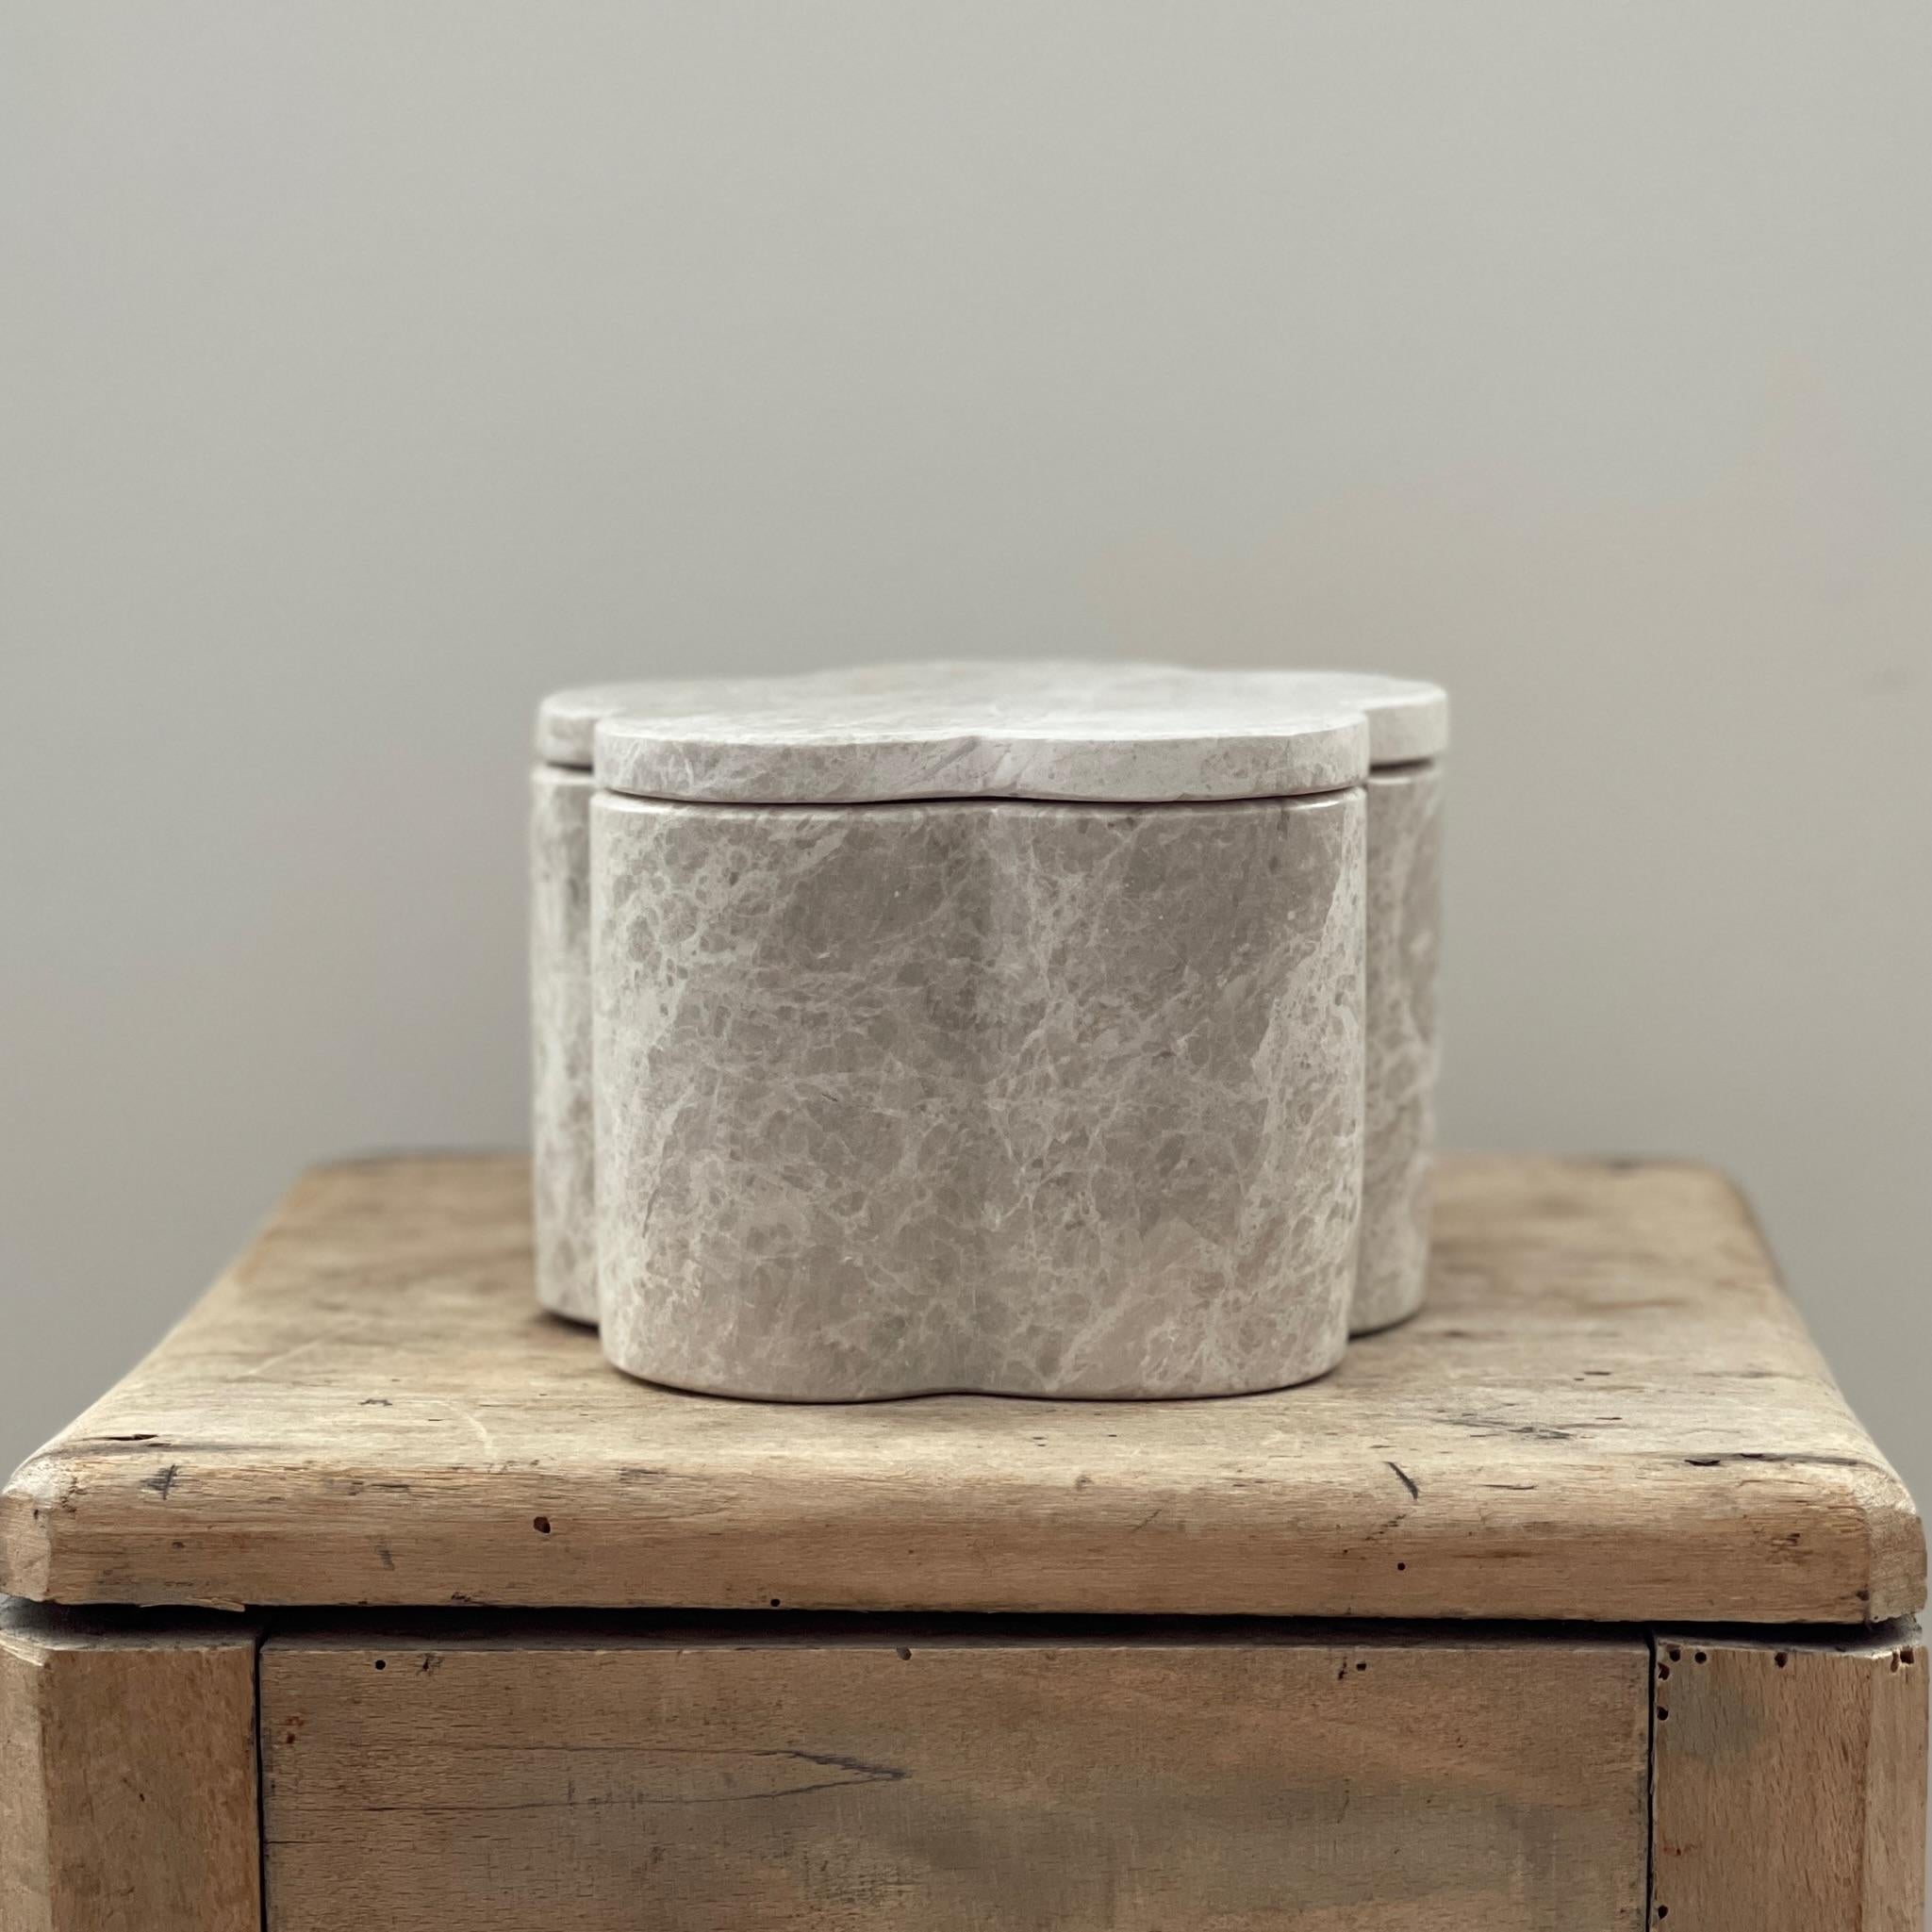 Bud Box is a limited edition functional object d'art carved from a single cube of Italian Greige Marble. Hand-finished by a growing artisan atelier in Rajasthan, India it is produced exclusively by Anastasio Home. This joyful, floral inspired stash